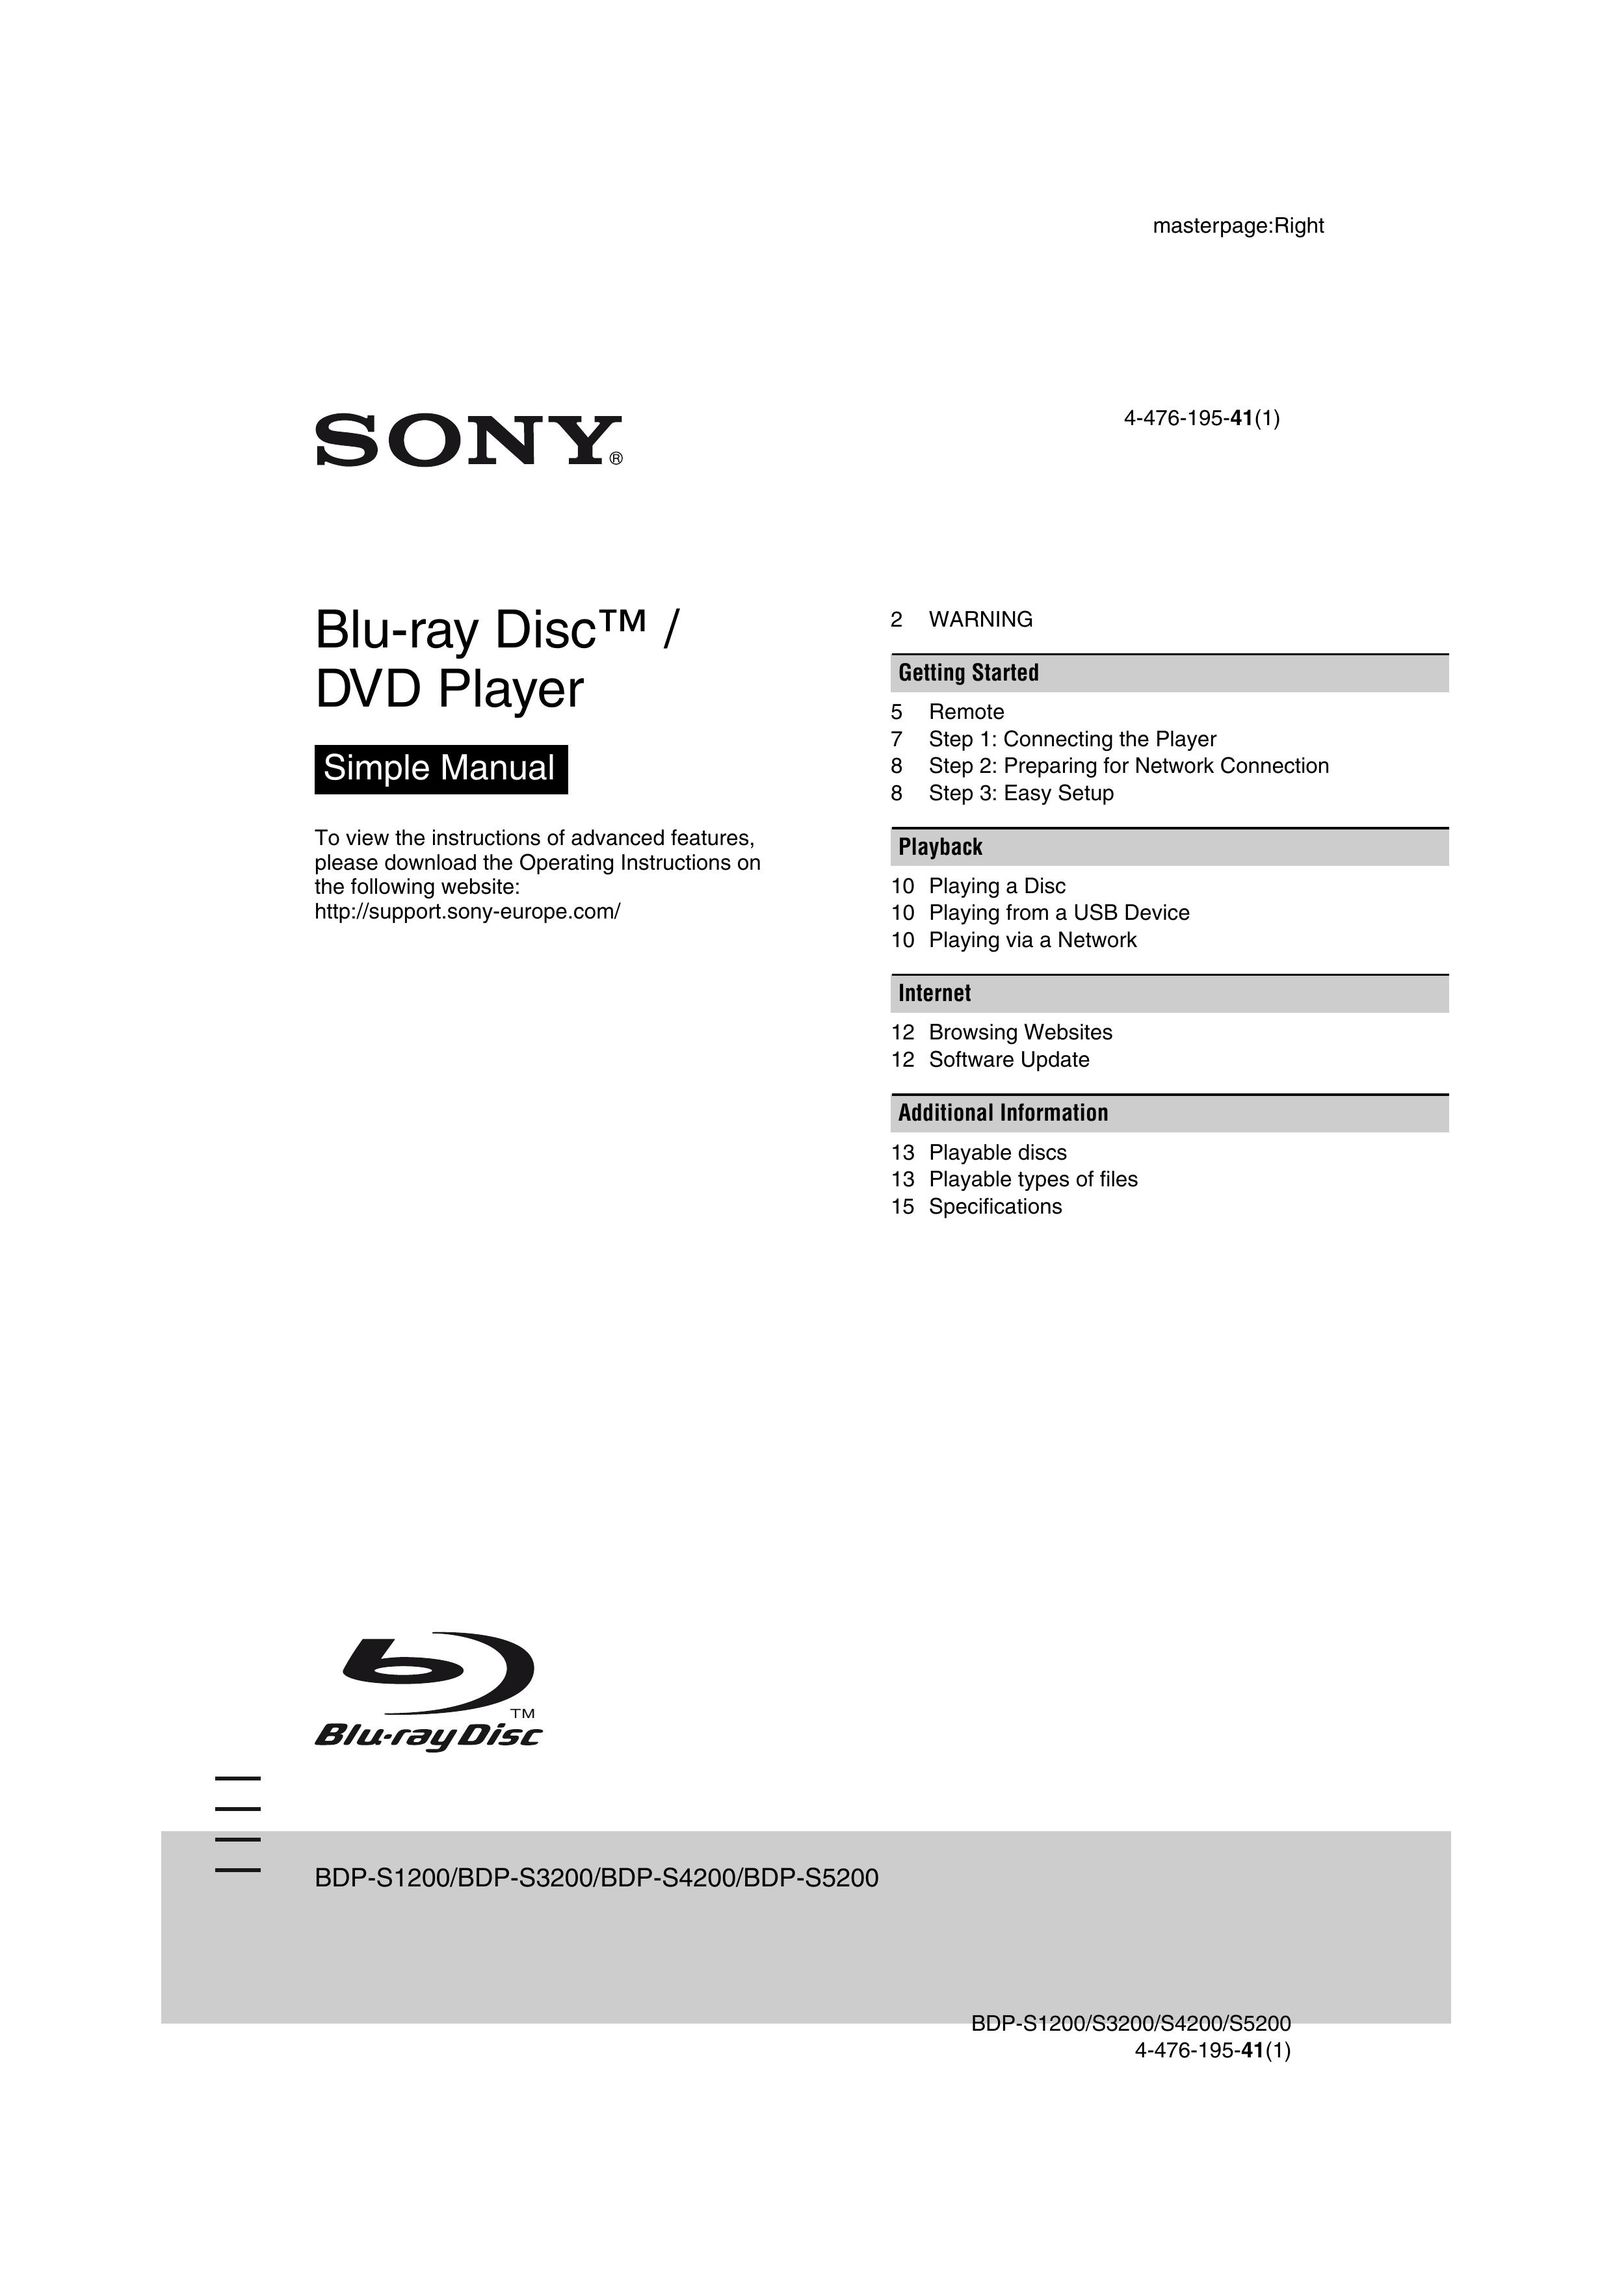 Sony BDP-S3200 Blu-ray Player User Manual